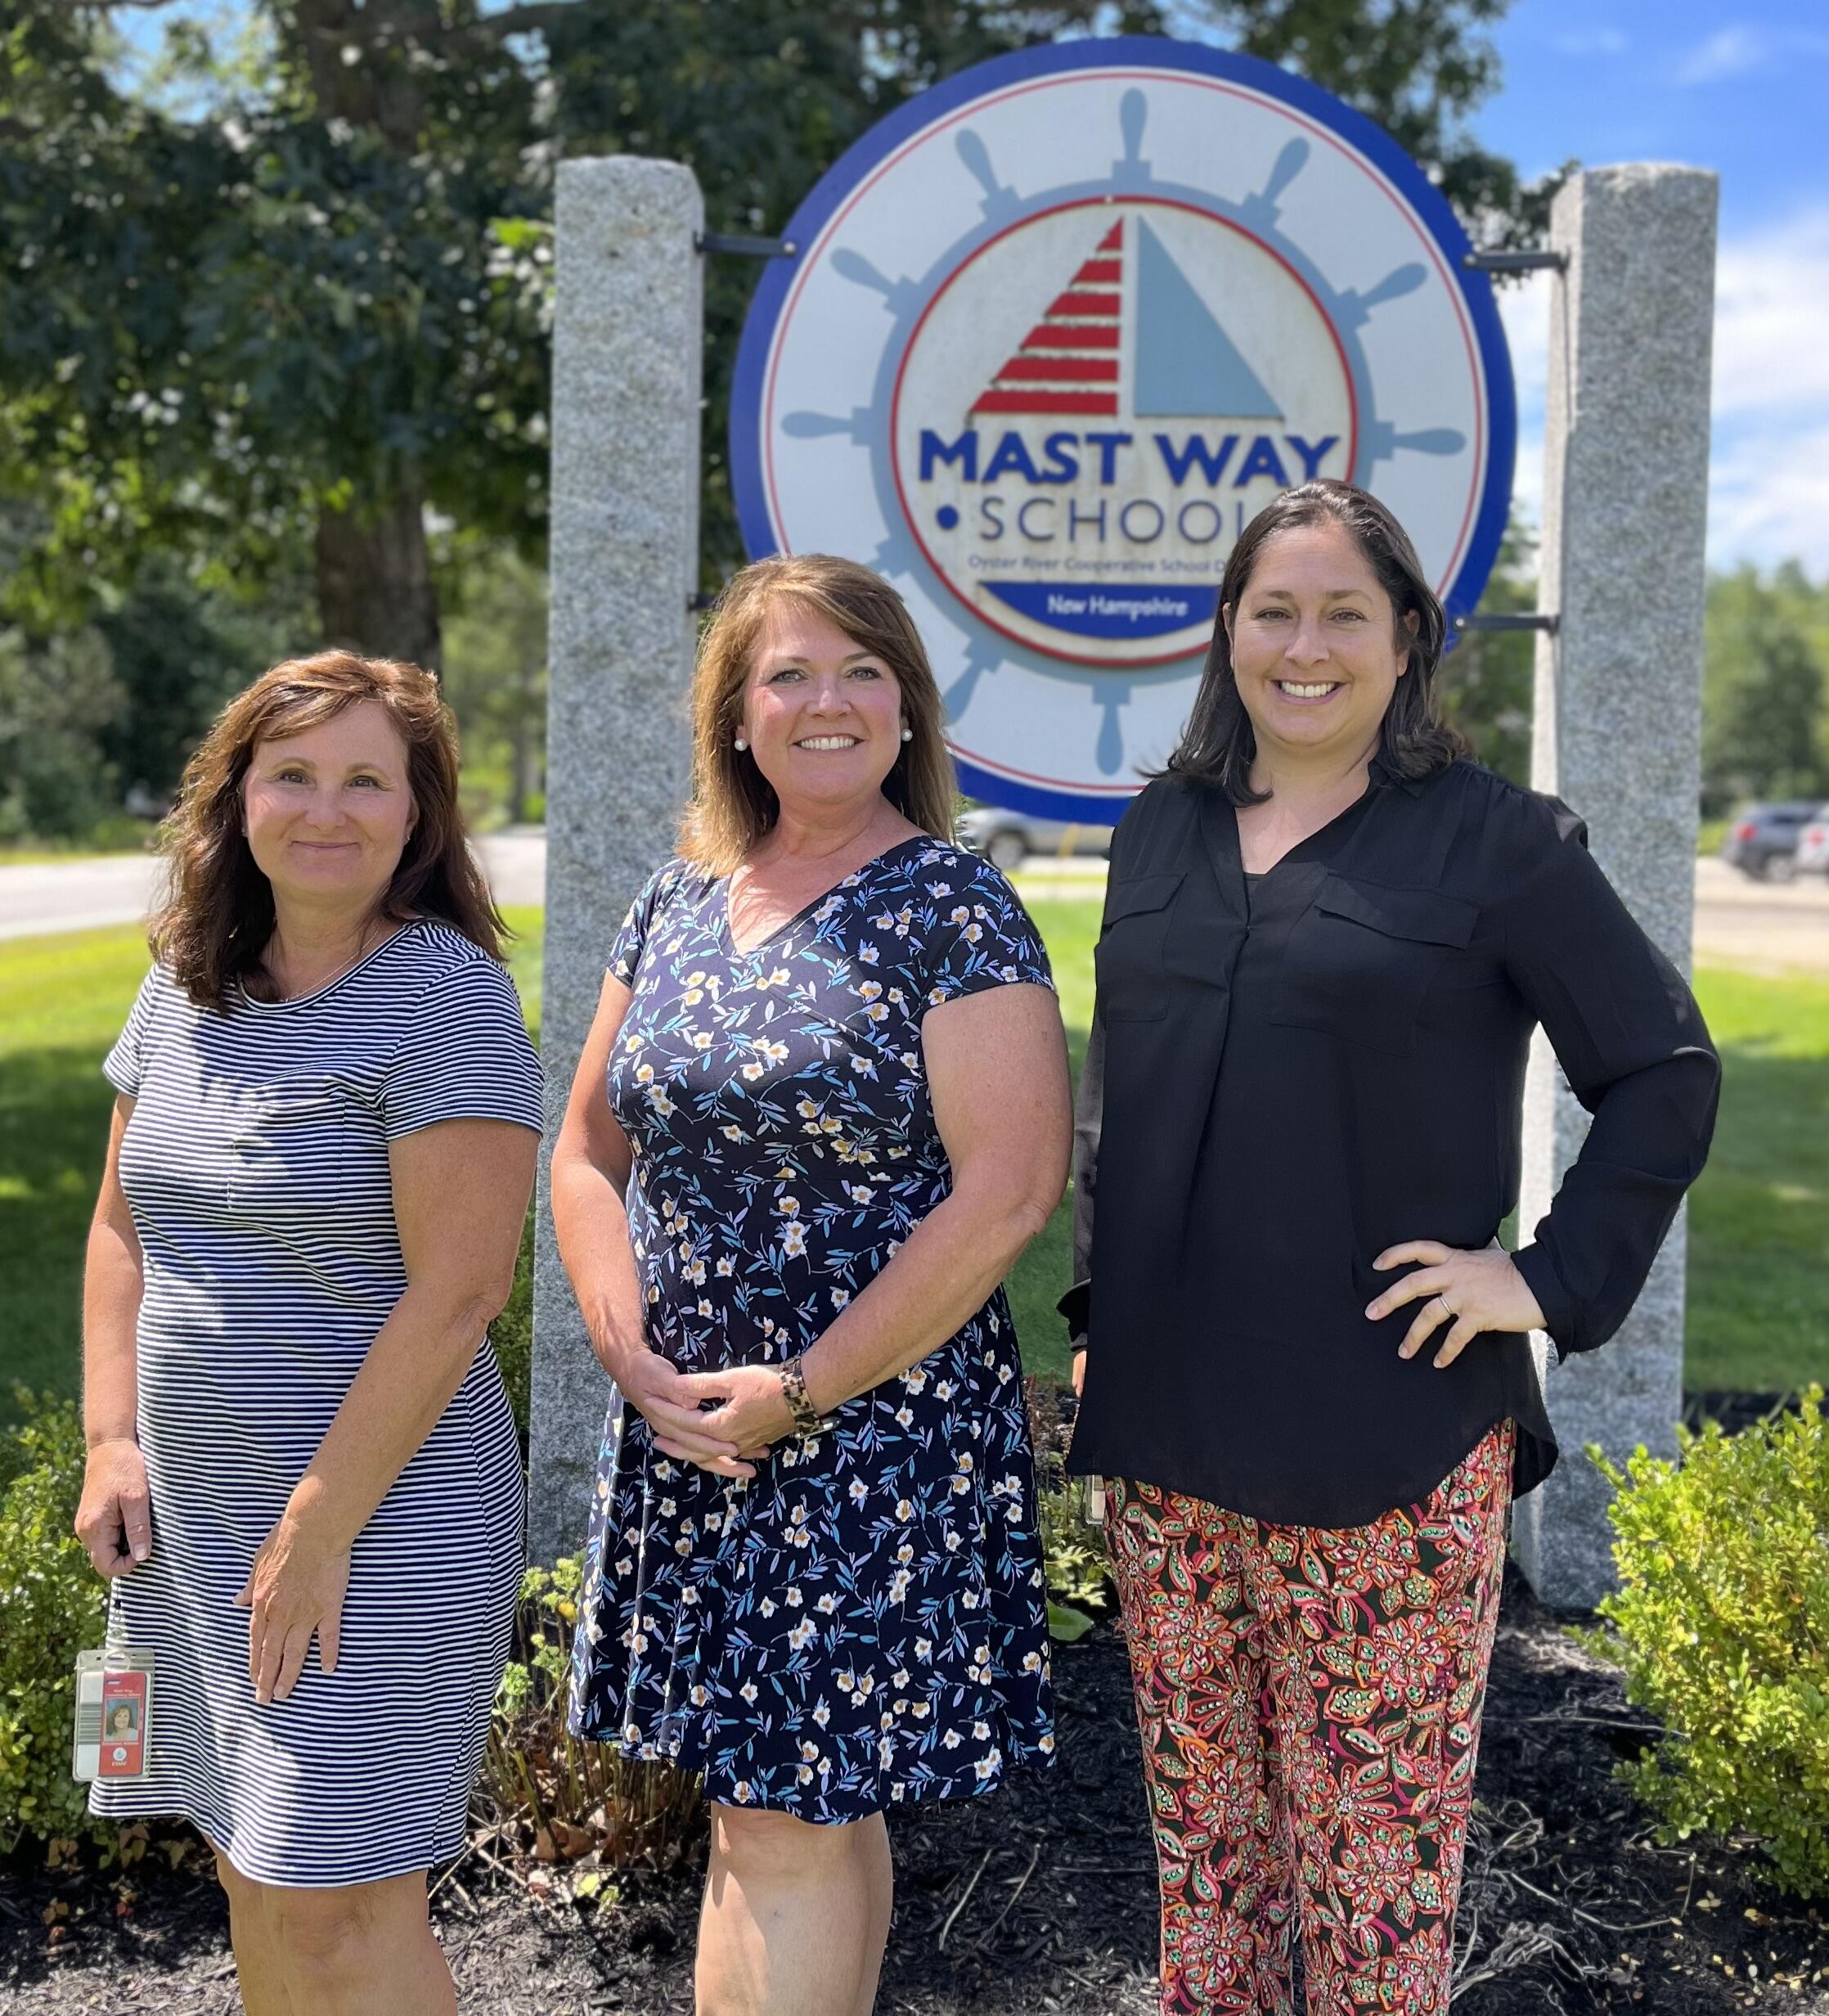 A photograph of Assistant to the Principal Christine Nelson, Principal Misty Lowe, and Secretary Devon Anthony taken outside Mast Way Elementary School in front of the school's logo.